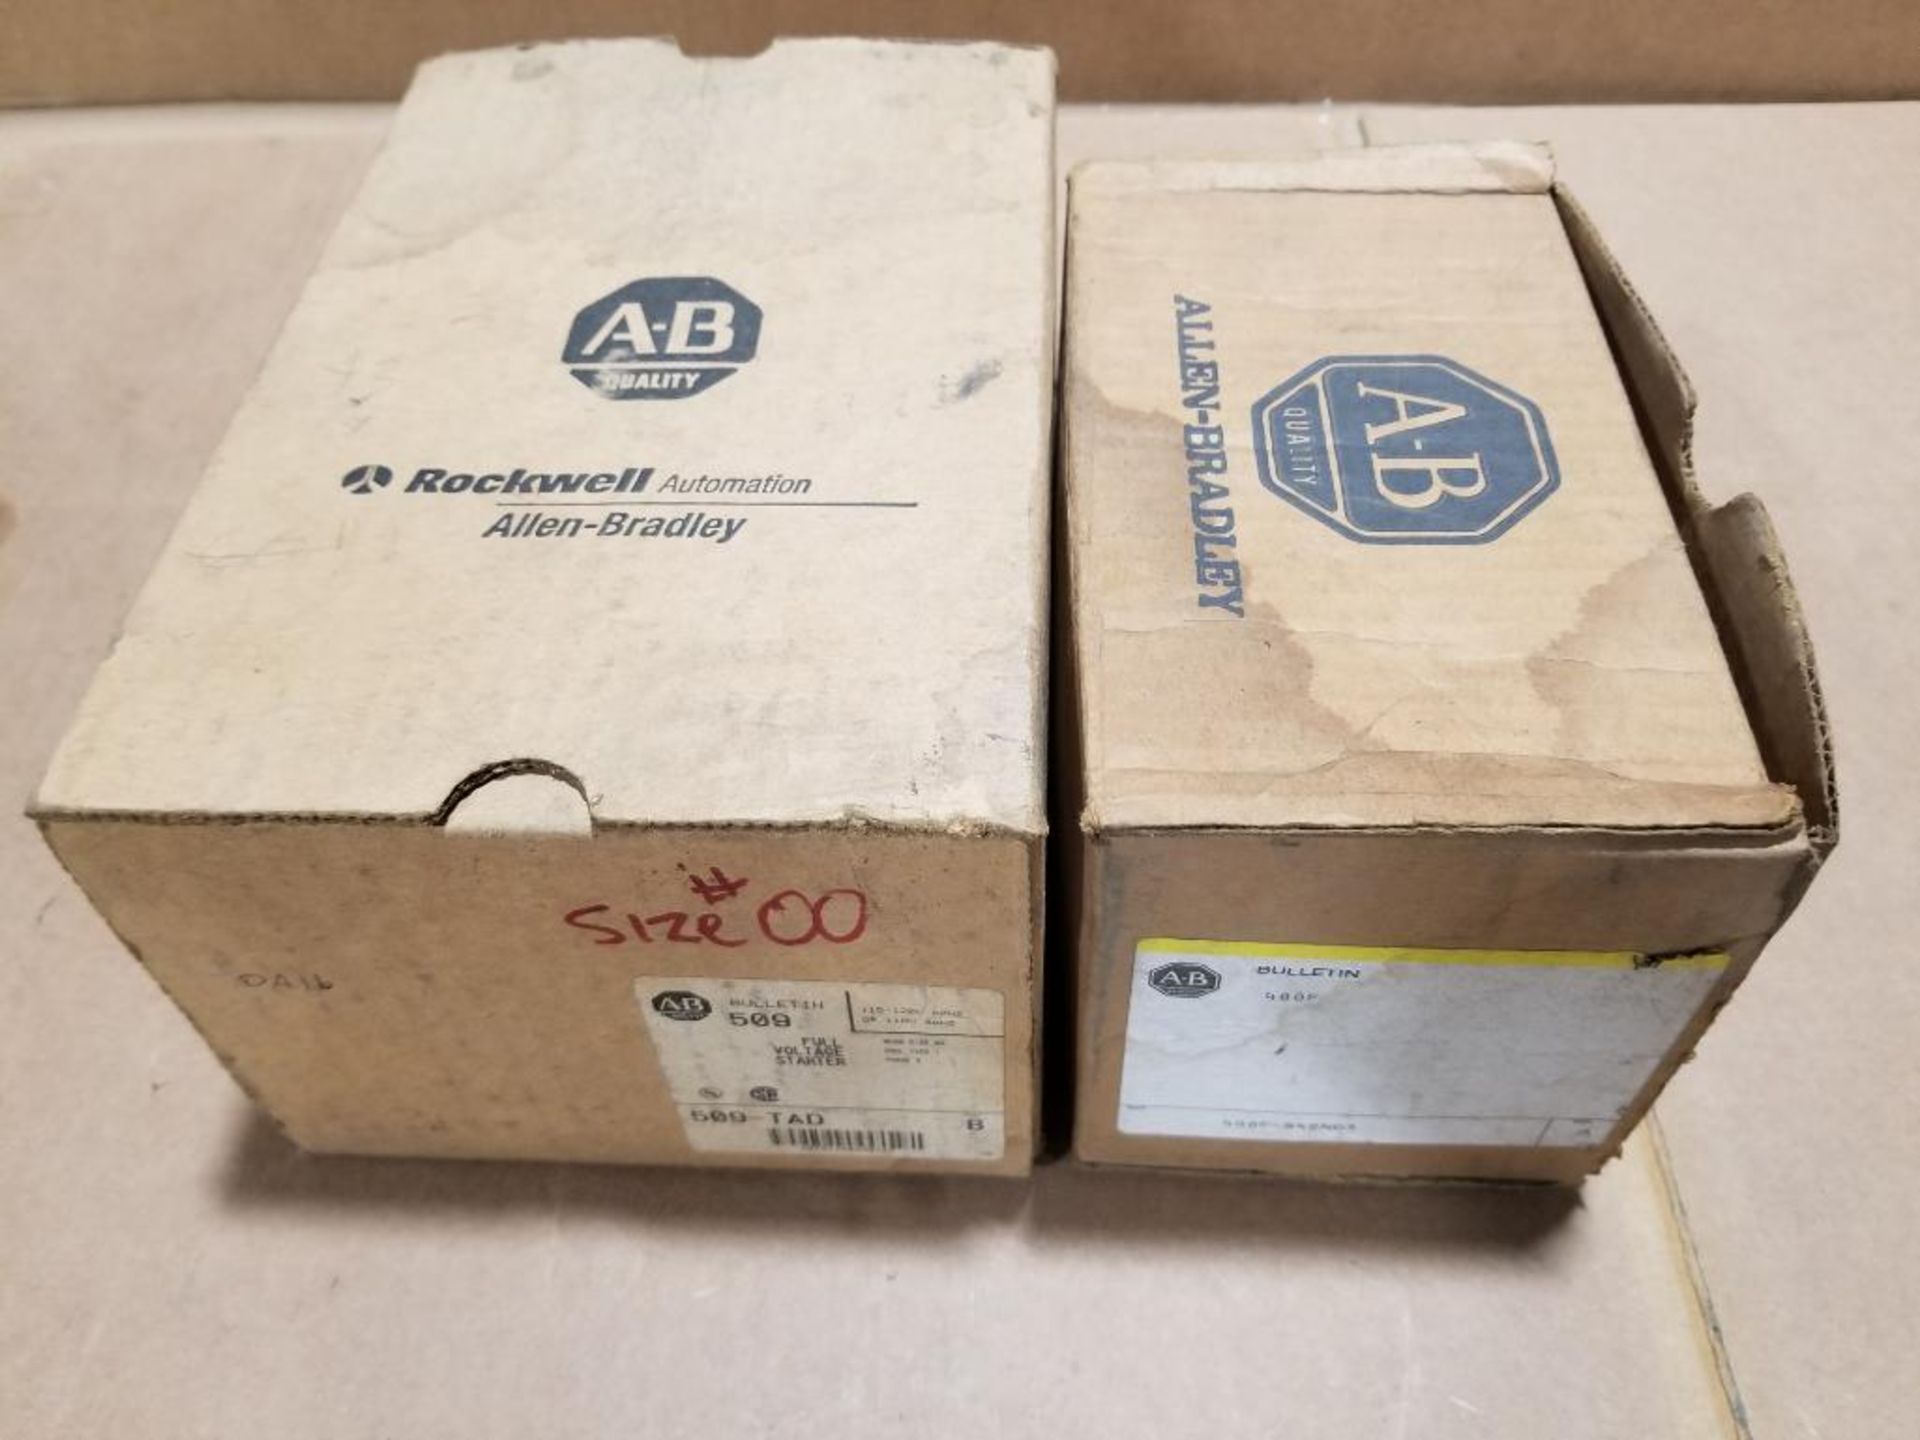 Qty 2 - Allen Bradley starter. Catalog 400F-B40ND3 and 509-TAD. - Image 4 of 6